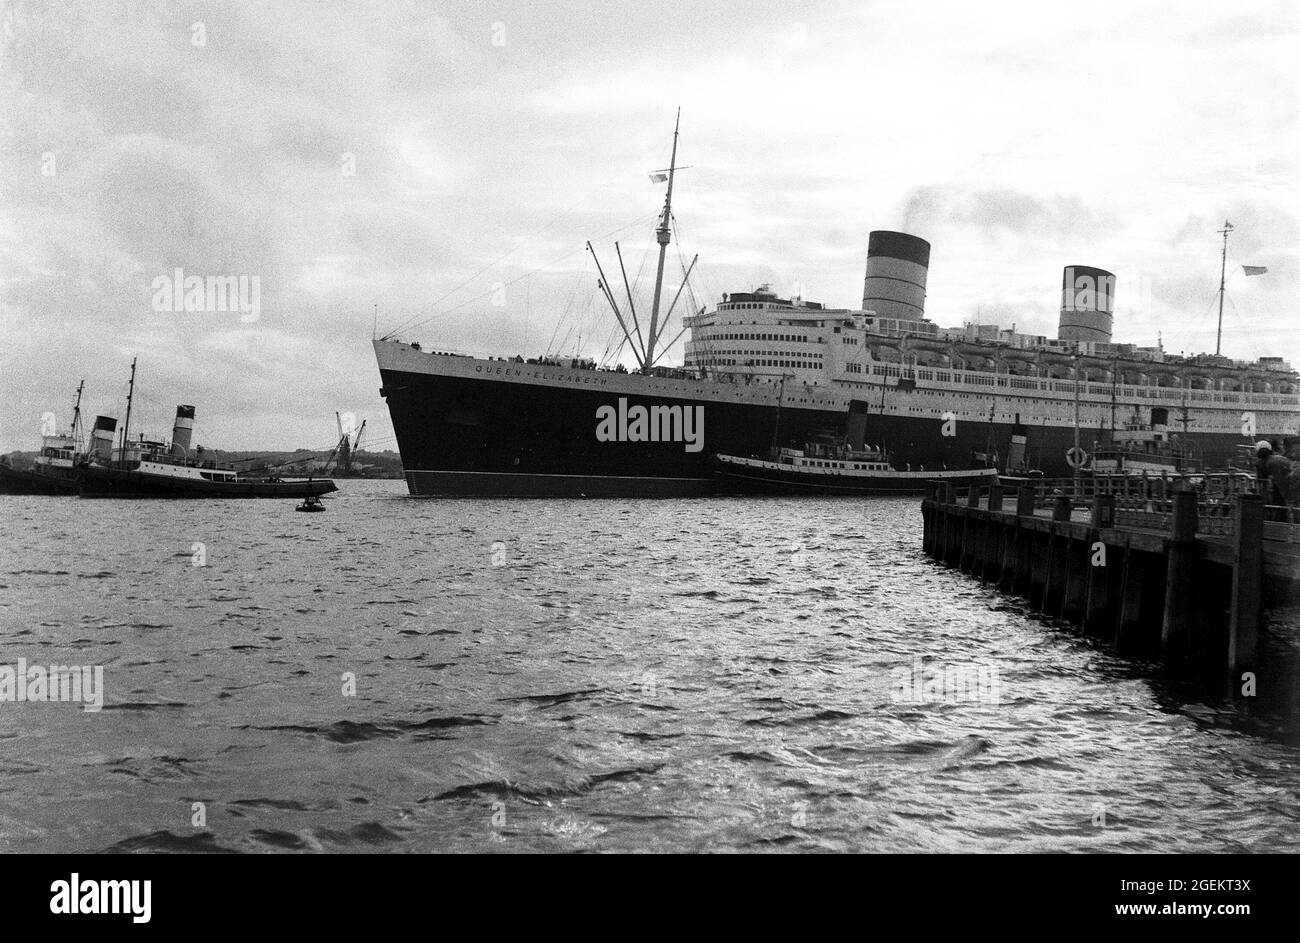 AJAXNETPHOTO. 1960S. SOUTHAMPTON, ENGLAND. - OUTWARD BOUND - CUNARD TRANSATLANTIC LINER RMS QUEEN ELIZABETH WITH TUGS IN ASSISTANCE, DEPARTS ON ONE OF HER REGULAR SCHEDULED SAILINGS TO NEW YORK.PHOTO:©SUSANNAH RITCHIE COLLECTION/AJAX REF:SR1960S 42 Stock Photo